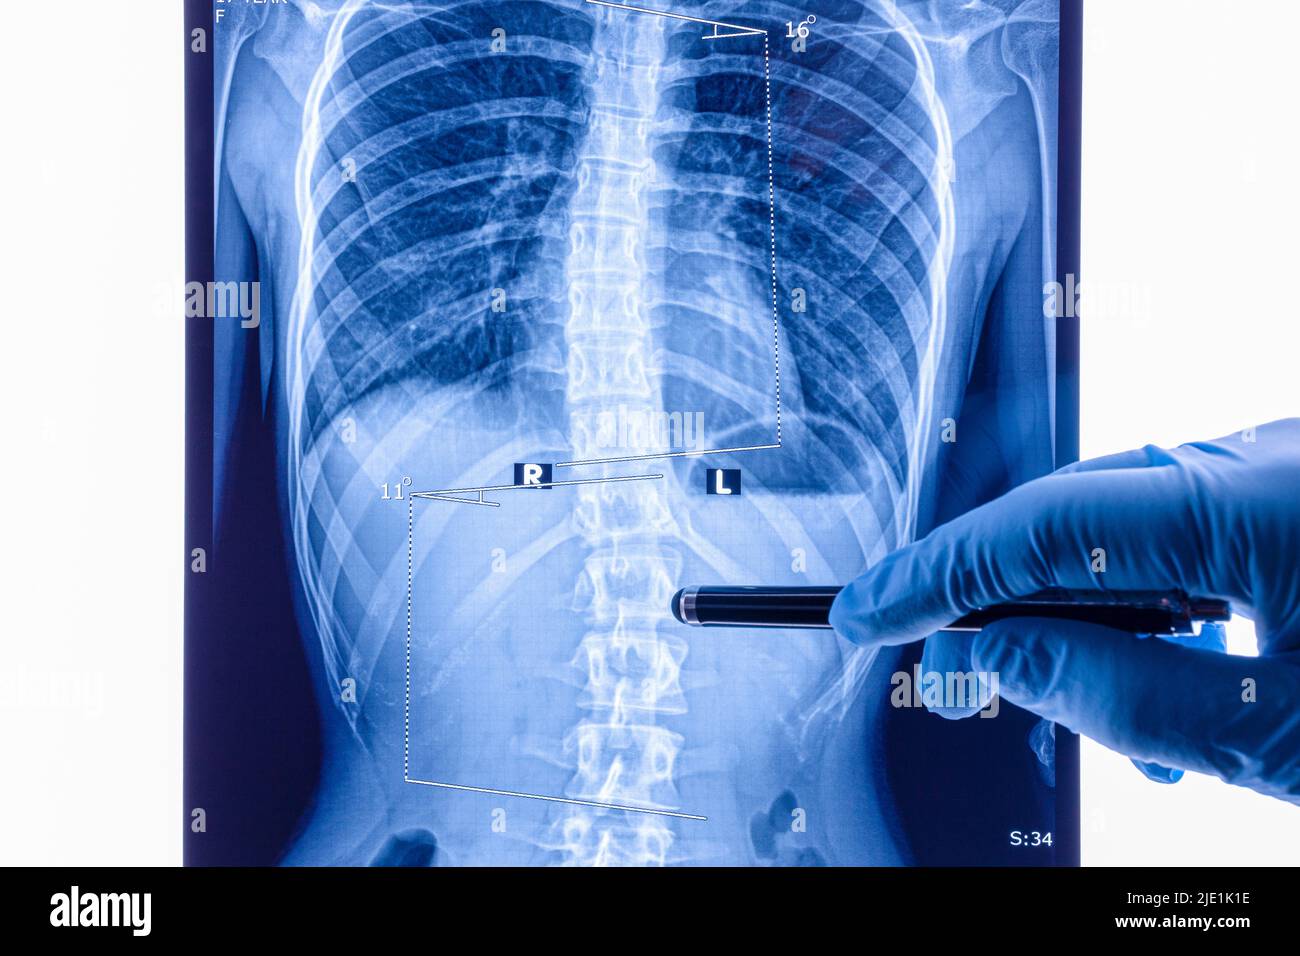 Doctor analyzing X ray of the spine showing scoliosis in the lumbar area. Scoliosis is an abnormal lateral curvature of the spine. Stock Photo